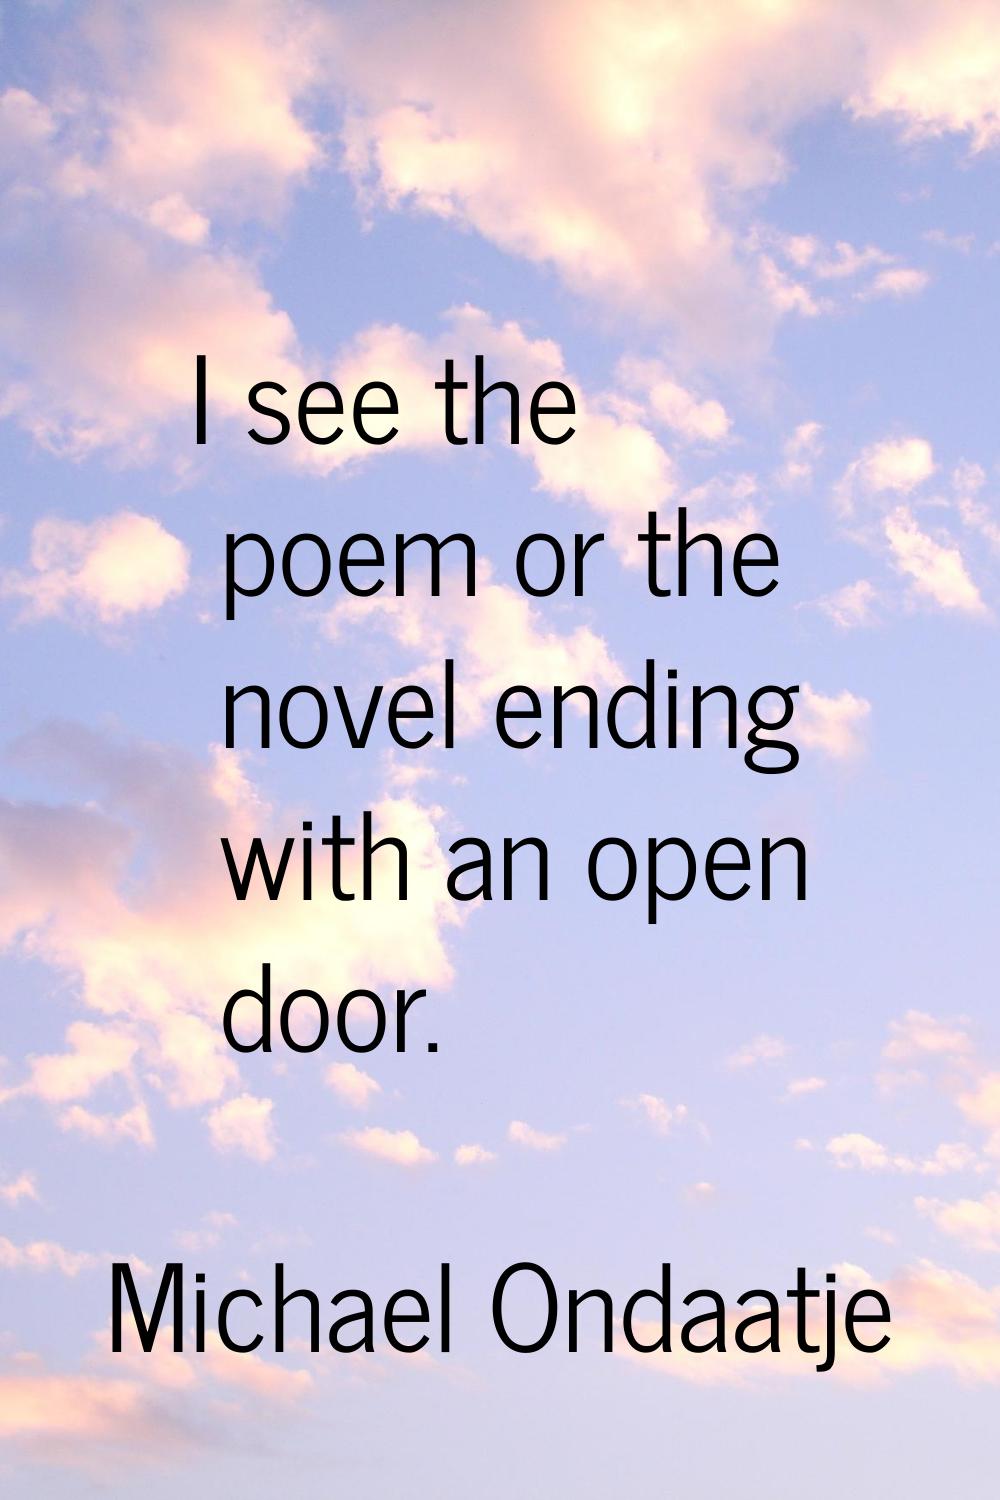 I see the poem or the novel ending with an open door.